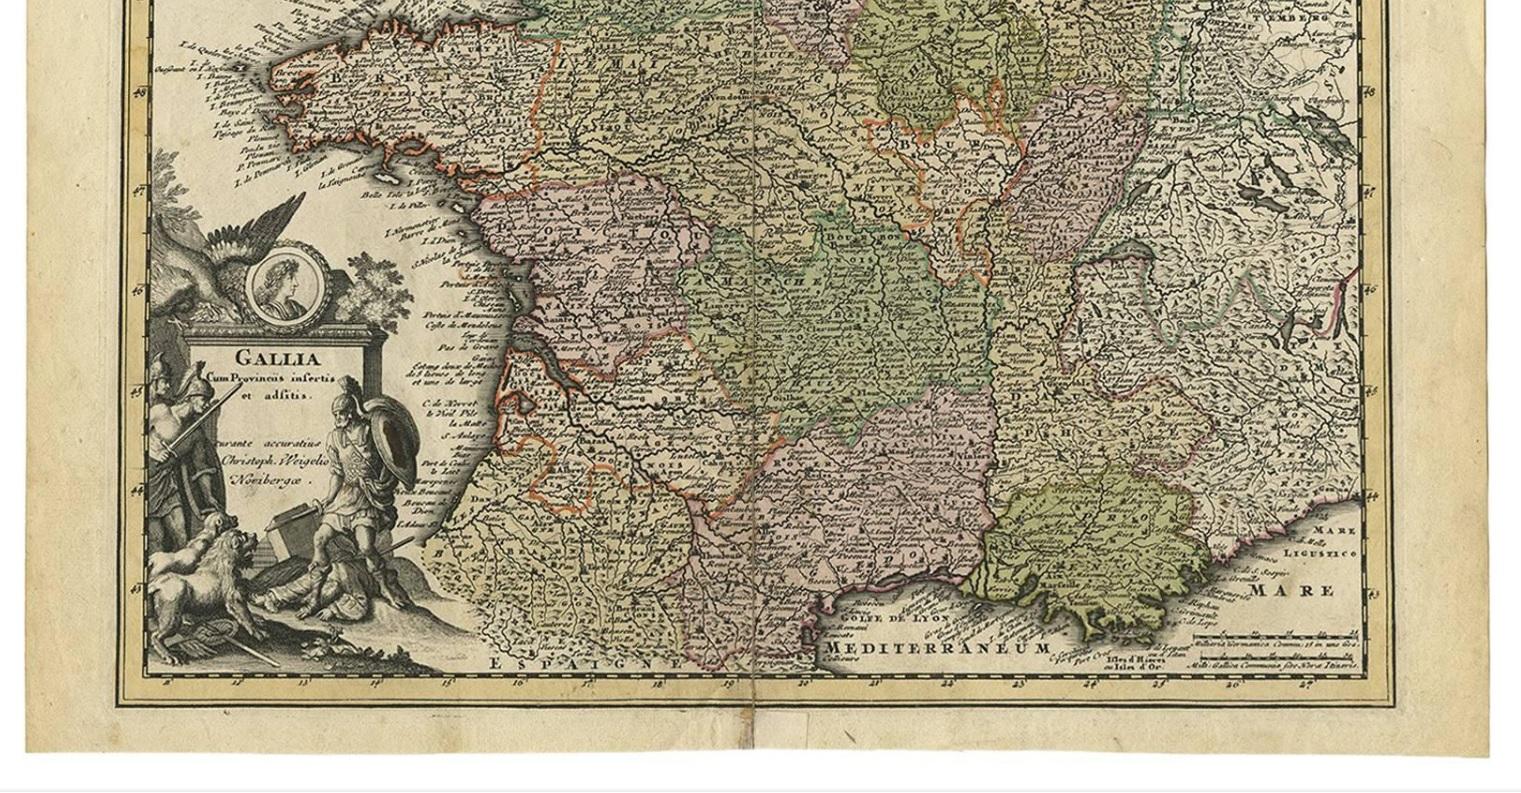 Antique map titled 'Gallia'. 

This highly detailed map shows France divided up into its provinces. The map provides a lot of information on place names, rivers, mountains, etc. The cartographer Christoph Weigel worked circa 1719 in Nürnberg and his